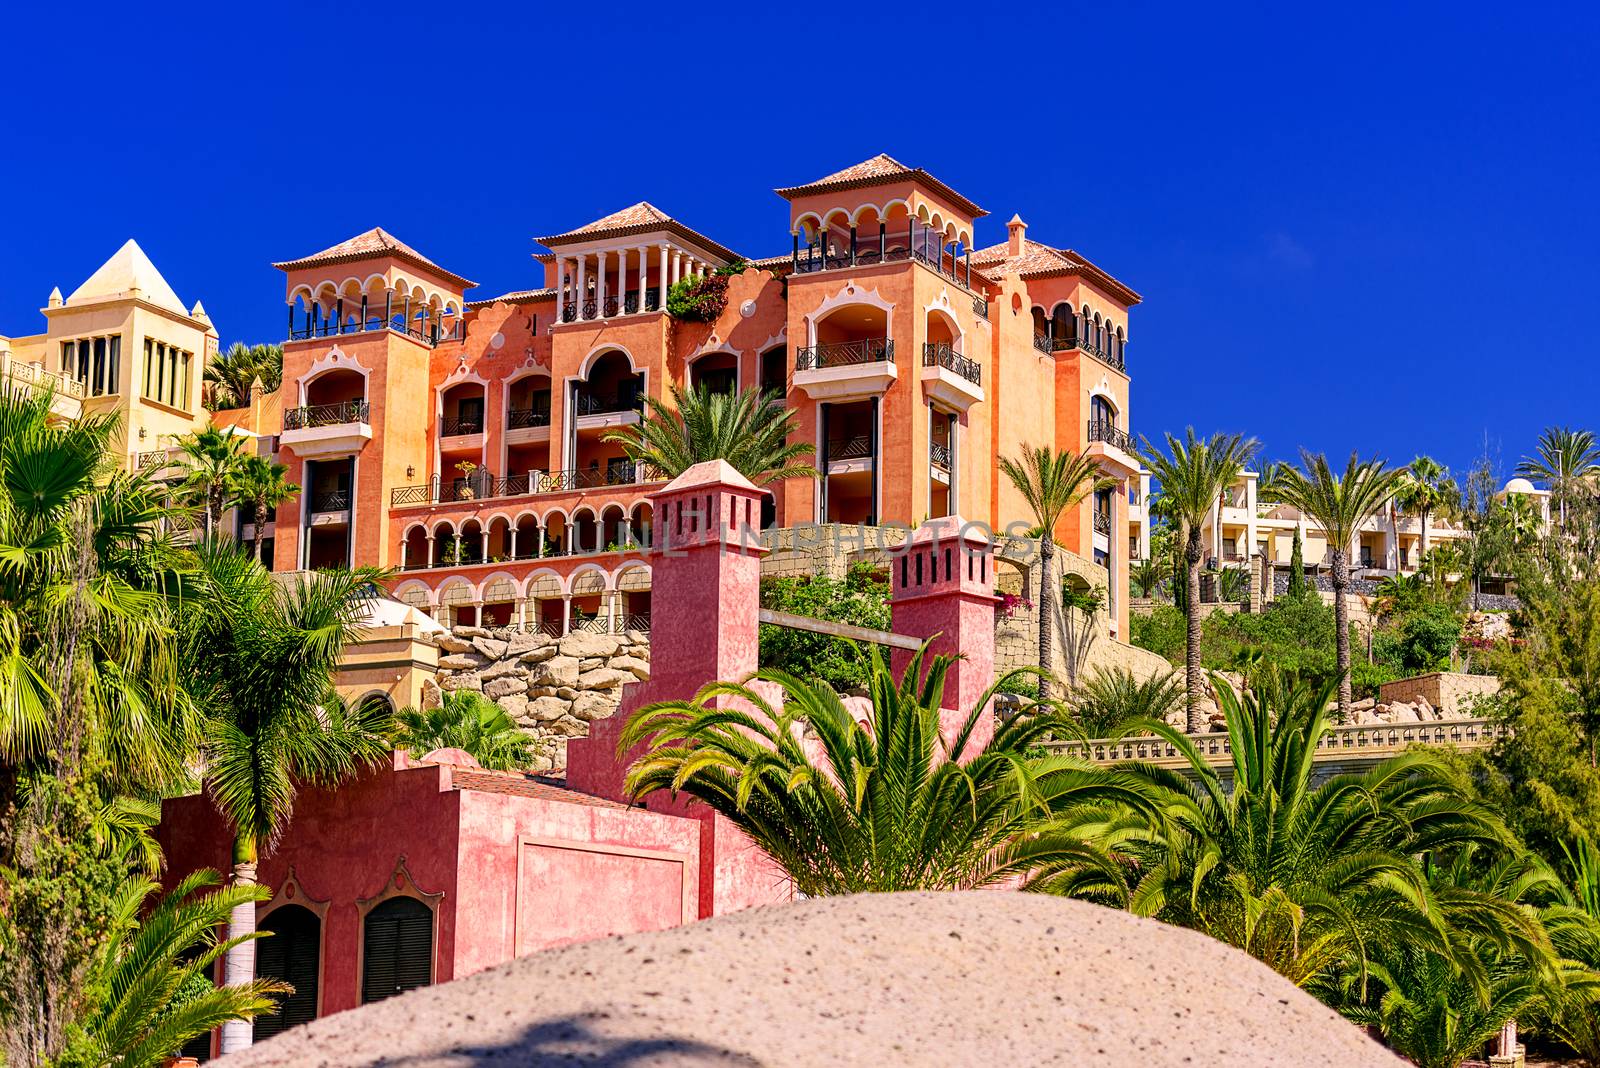 Resort at Tenerife Island, Spain. Typical architecture.